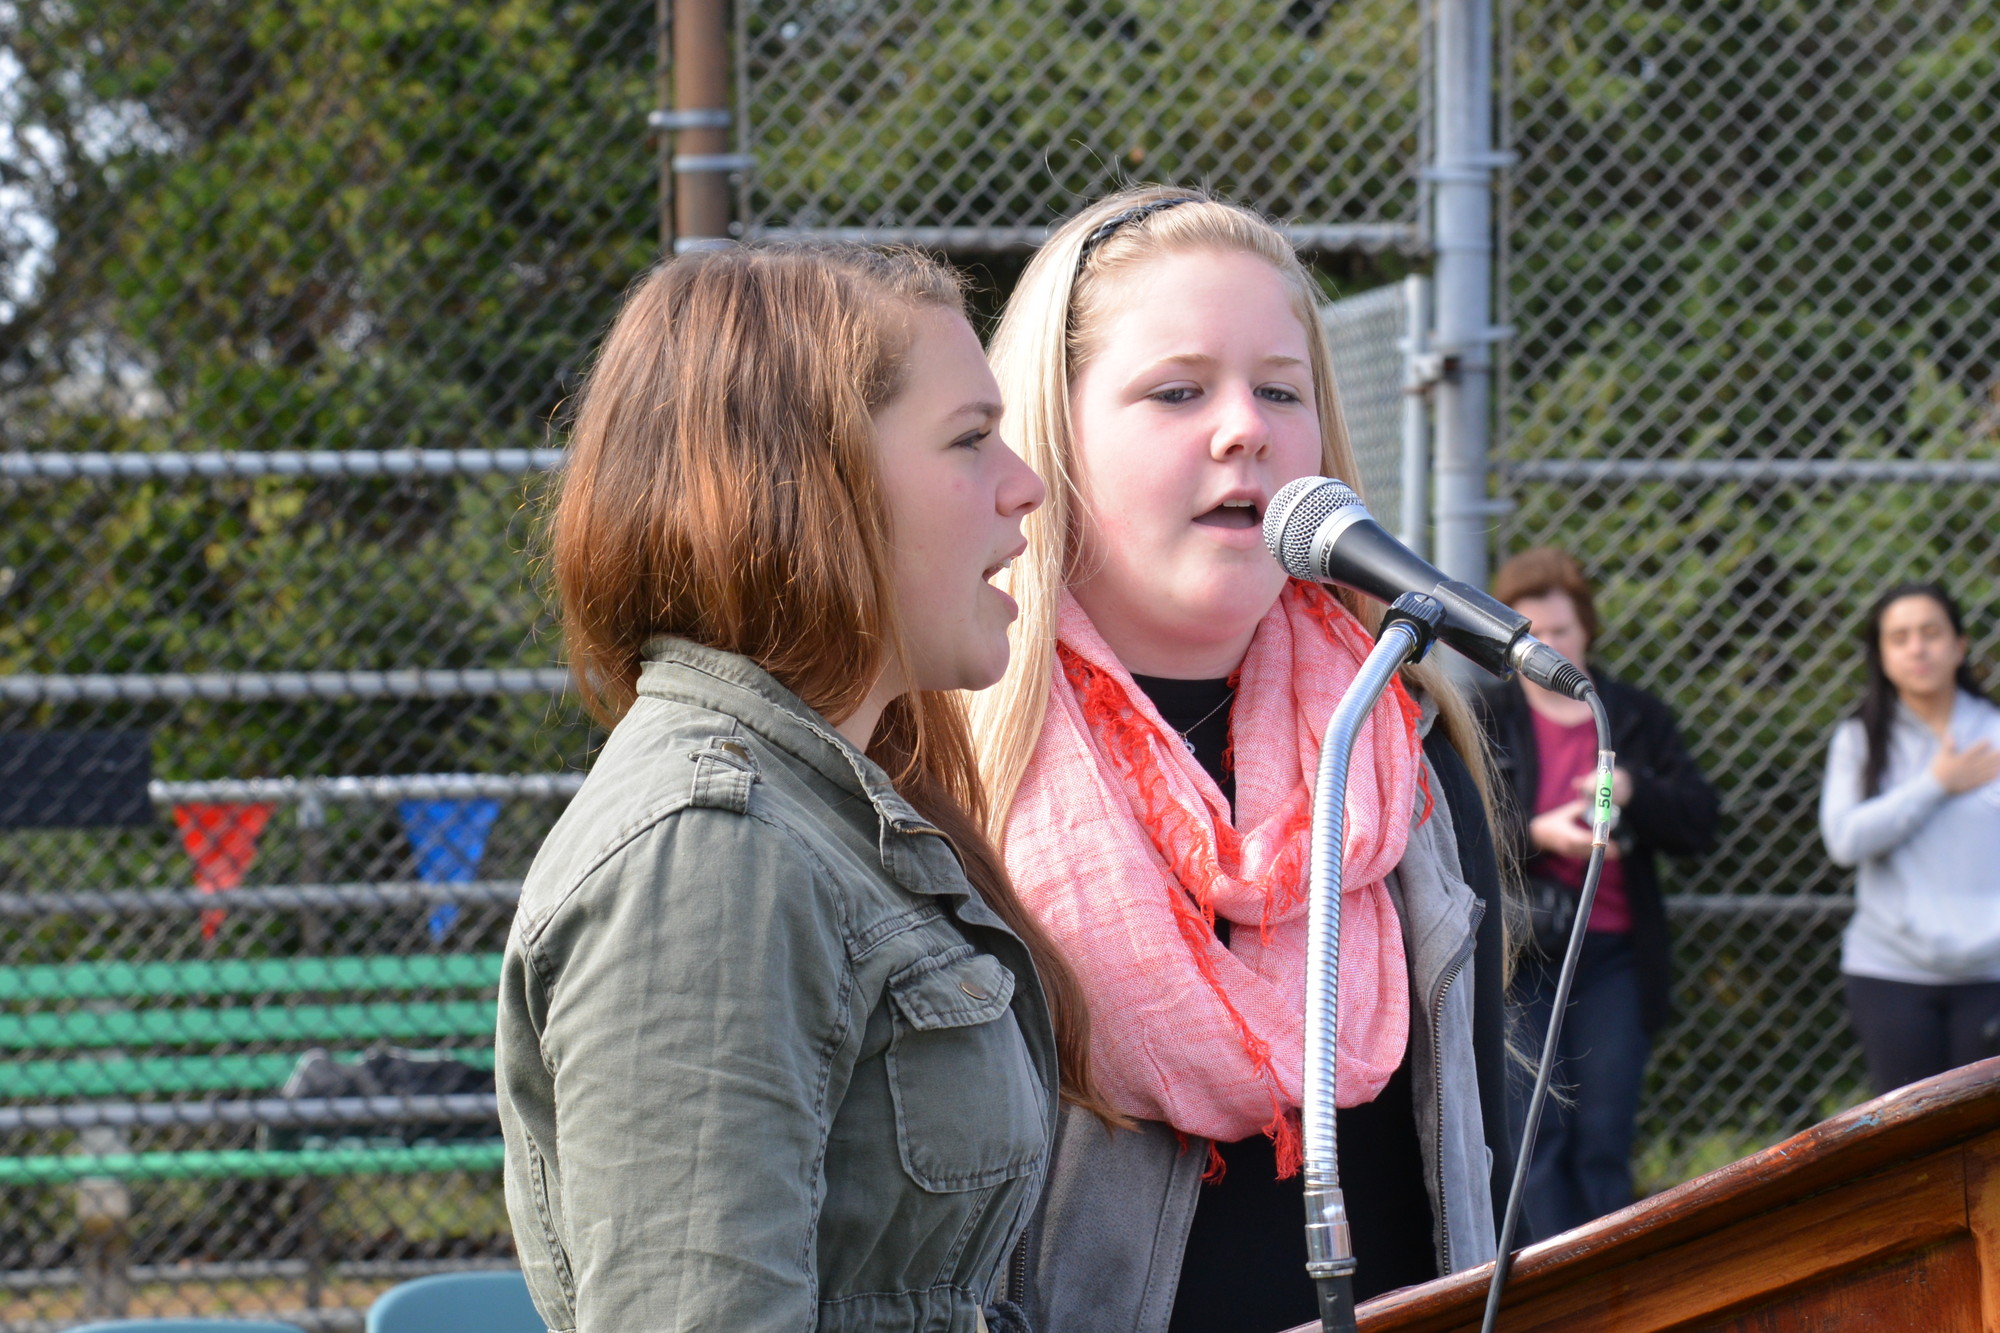 W.T. Clarke juniors Jenna Kennedy and Danielle Ragusa delivered a stirring performance of the National Anthem during the ceremony.